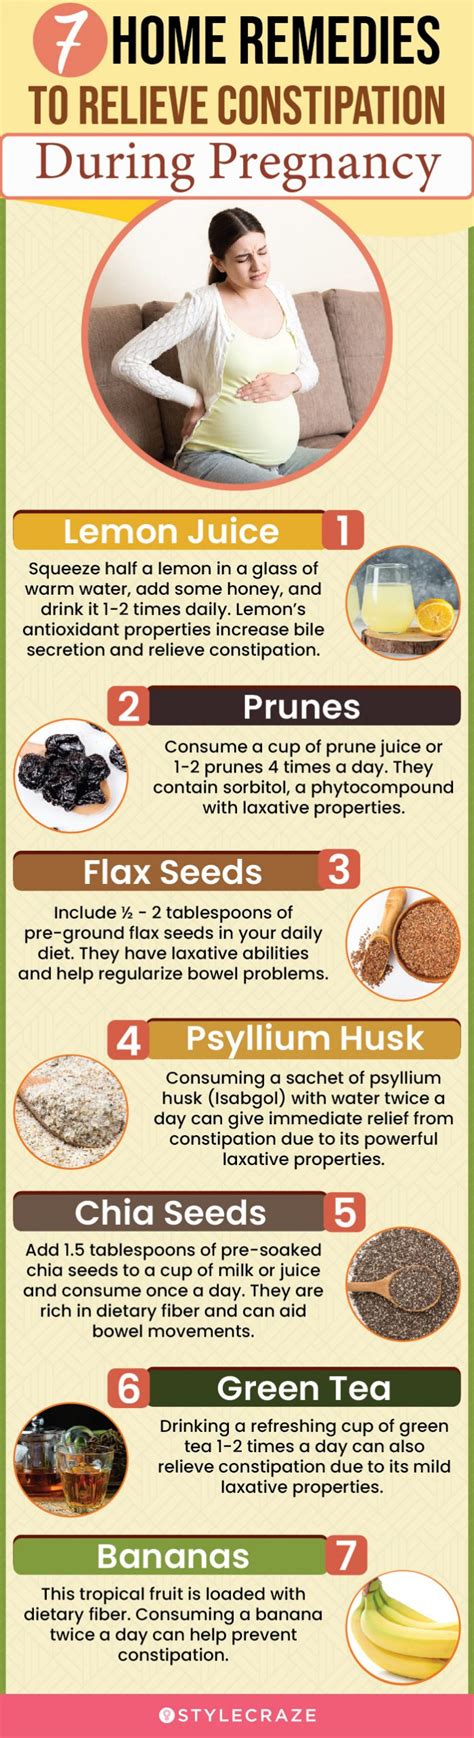 18 home remedies to relieve constipation during pregnancy causes and foods to eat